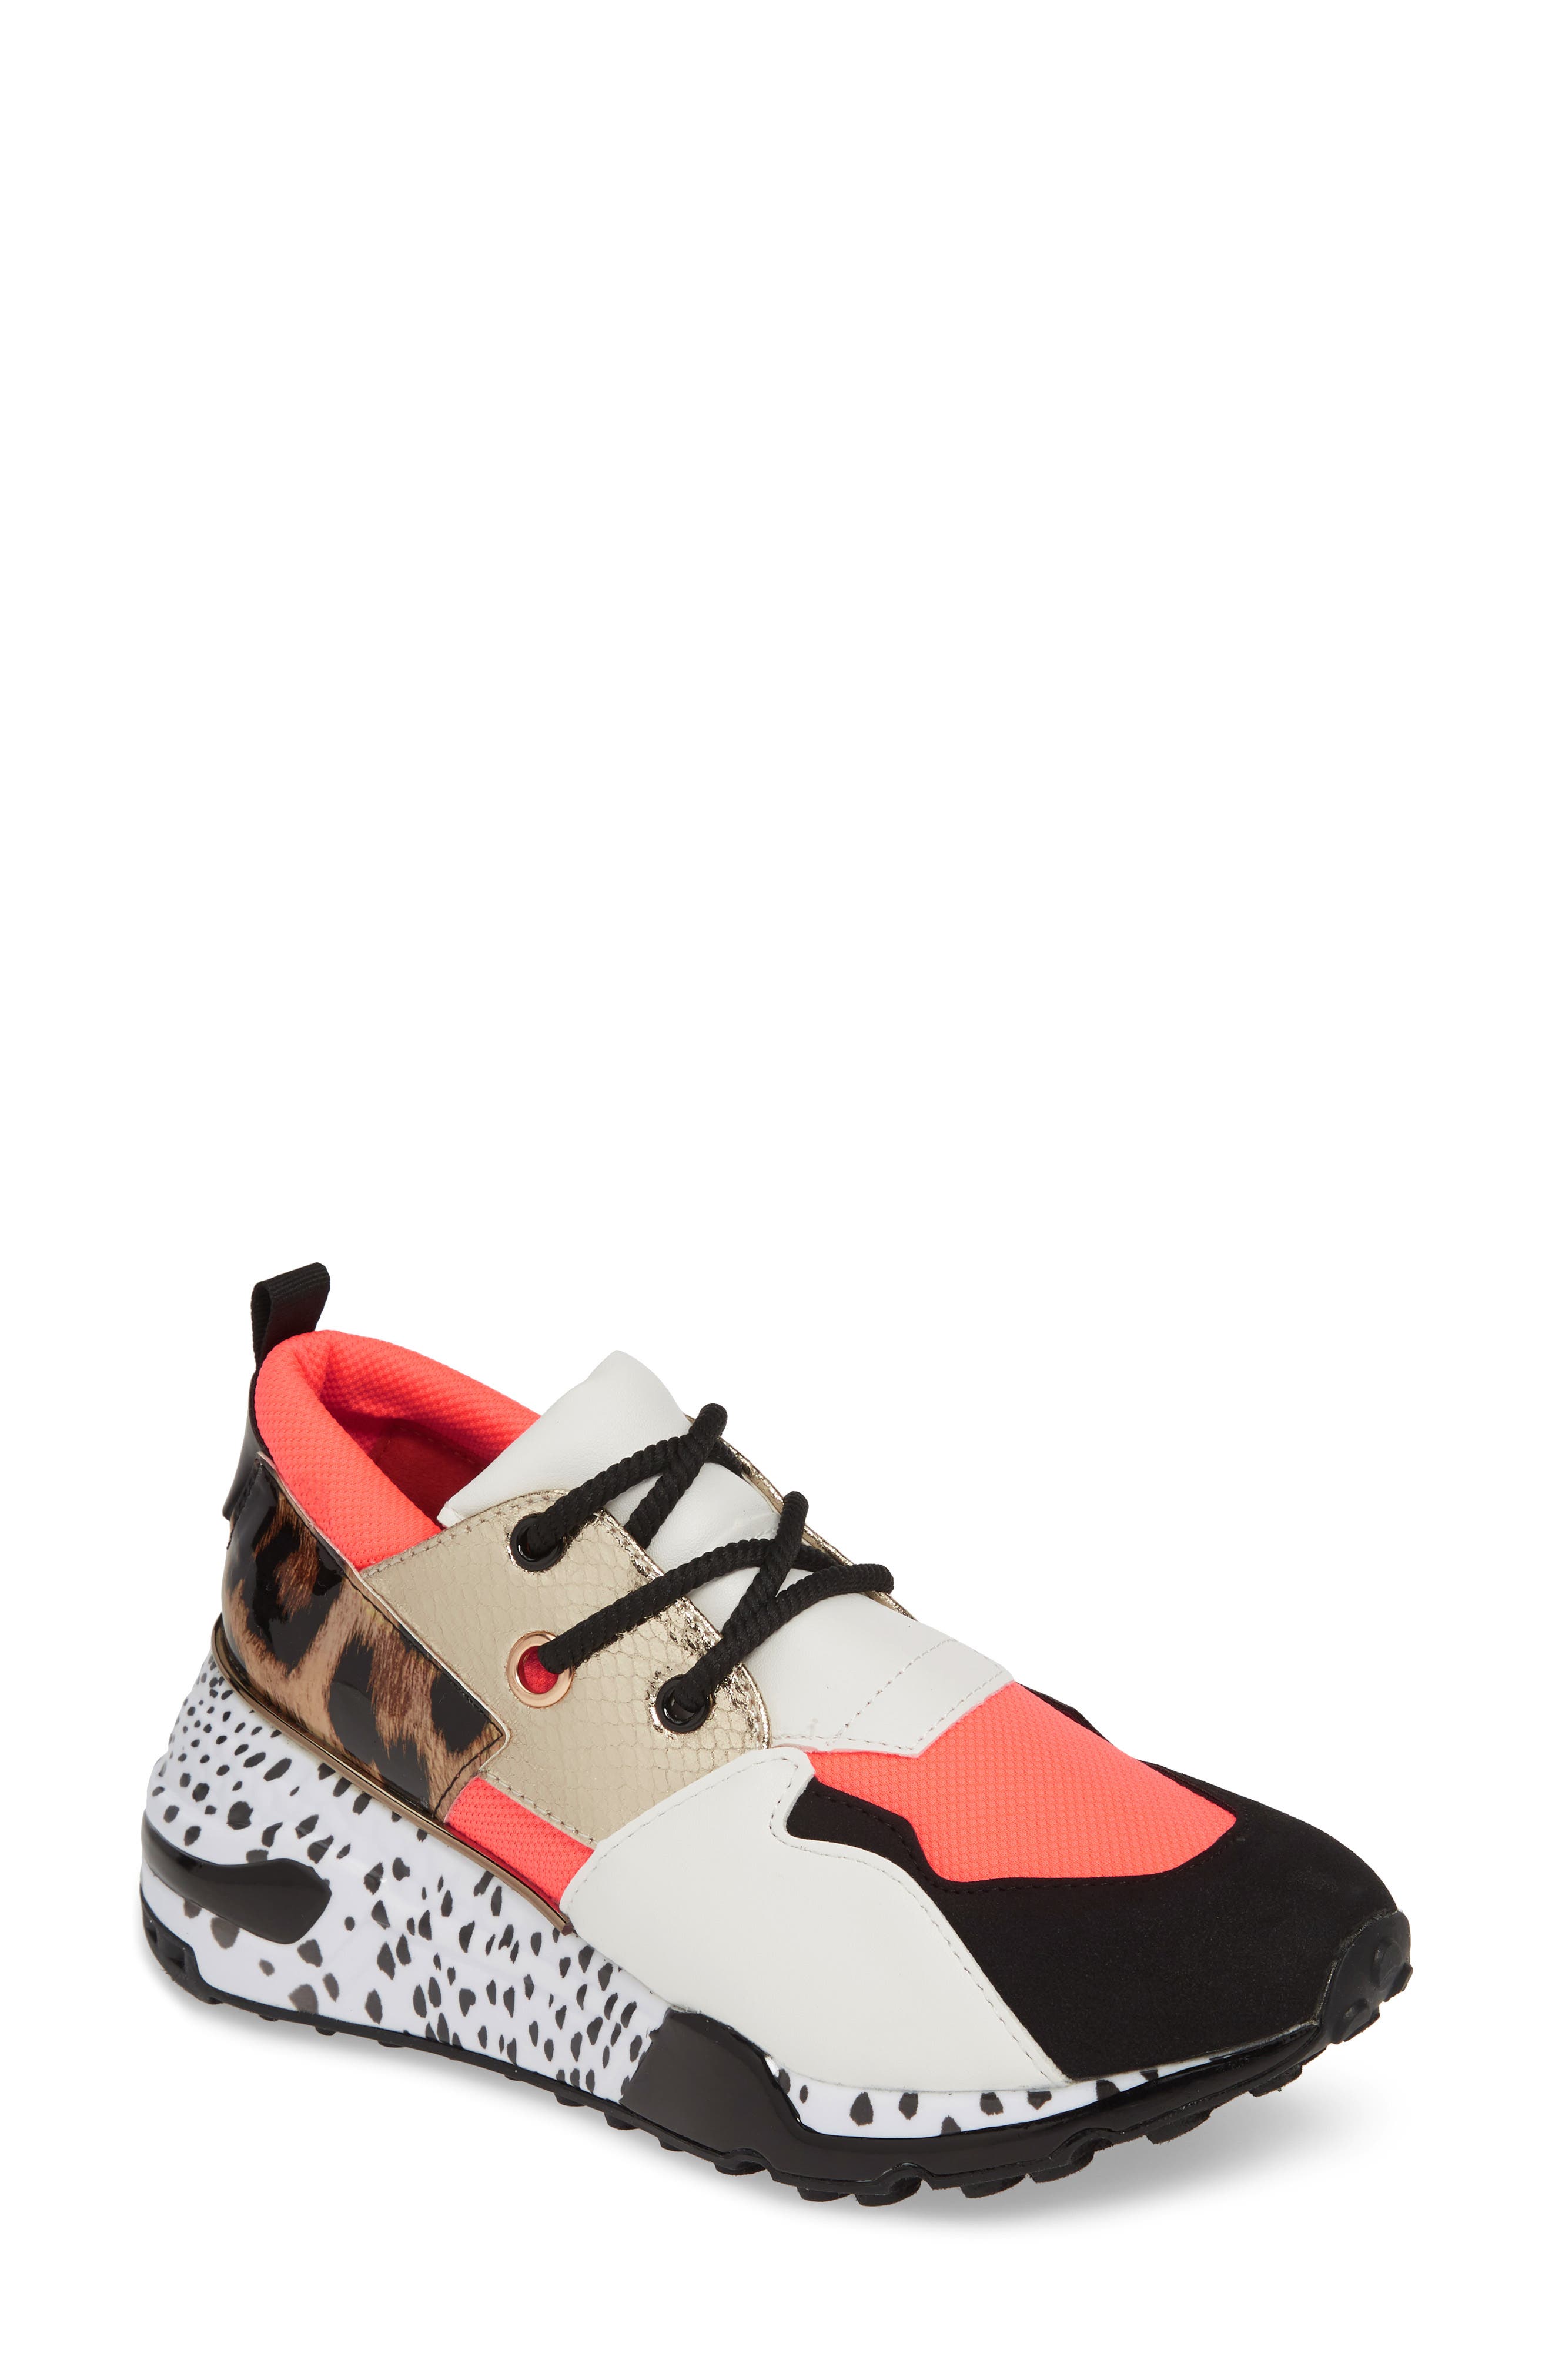 steve madden cliff sneakers coral